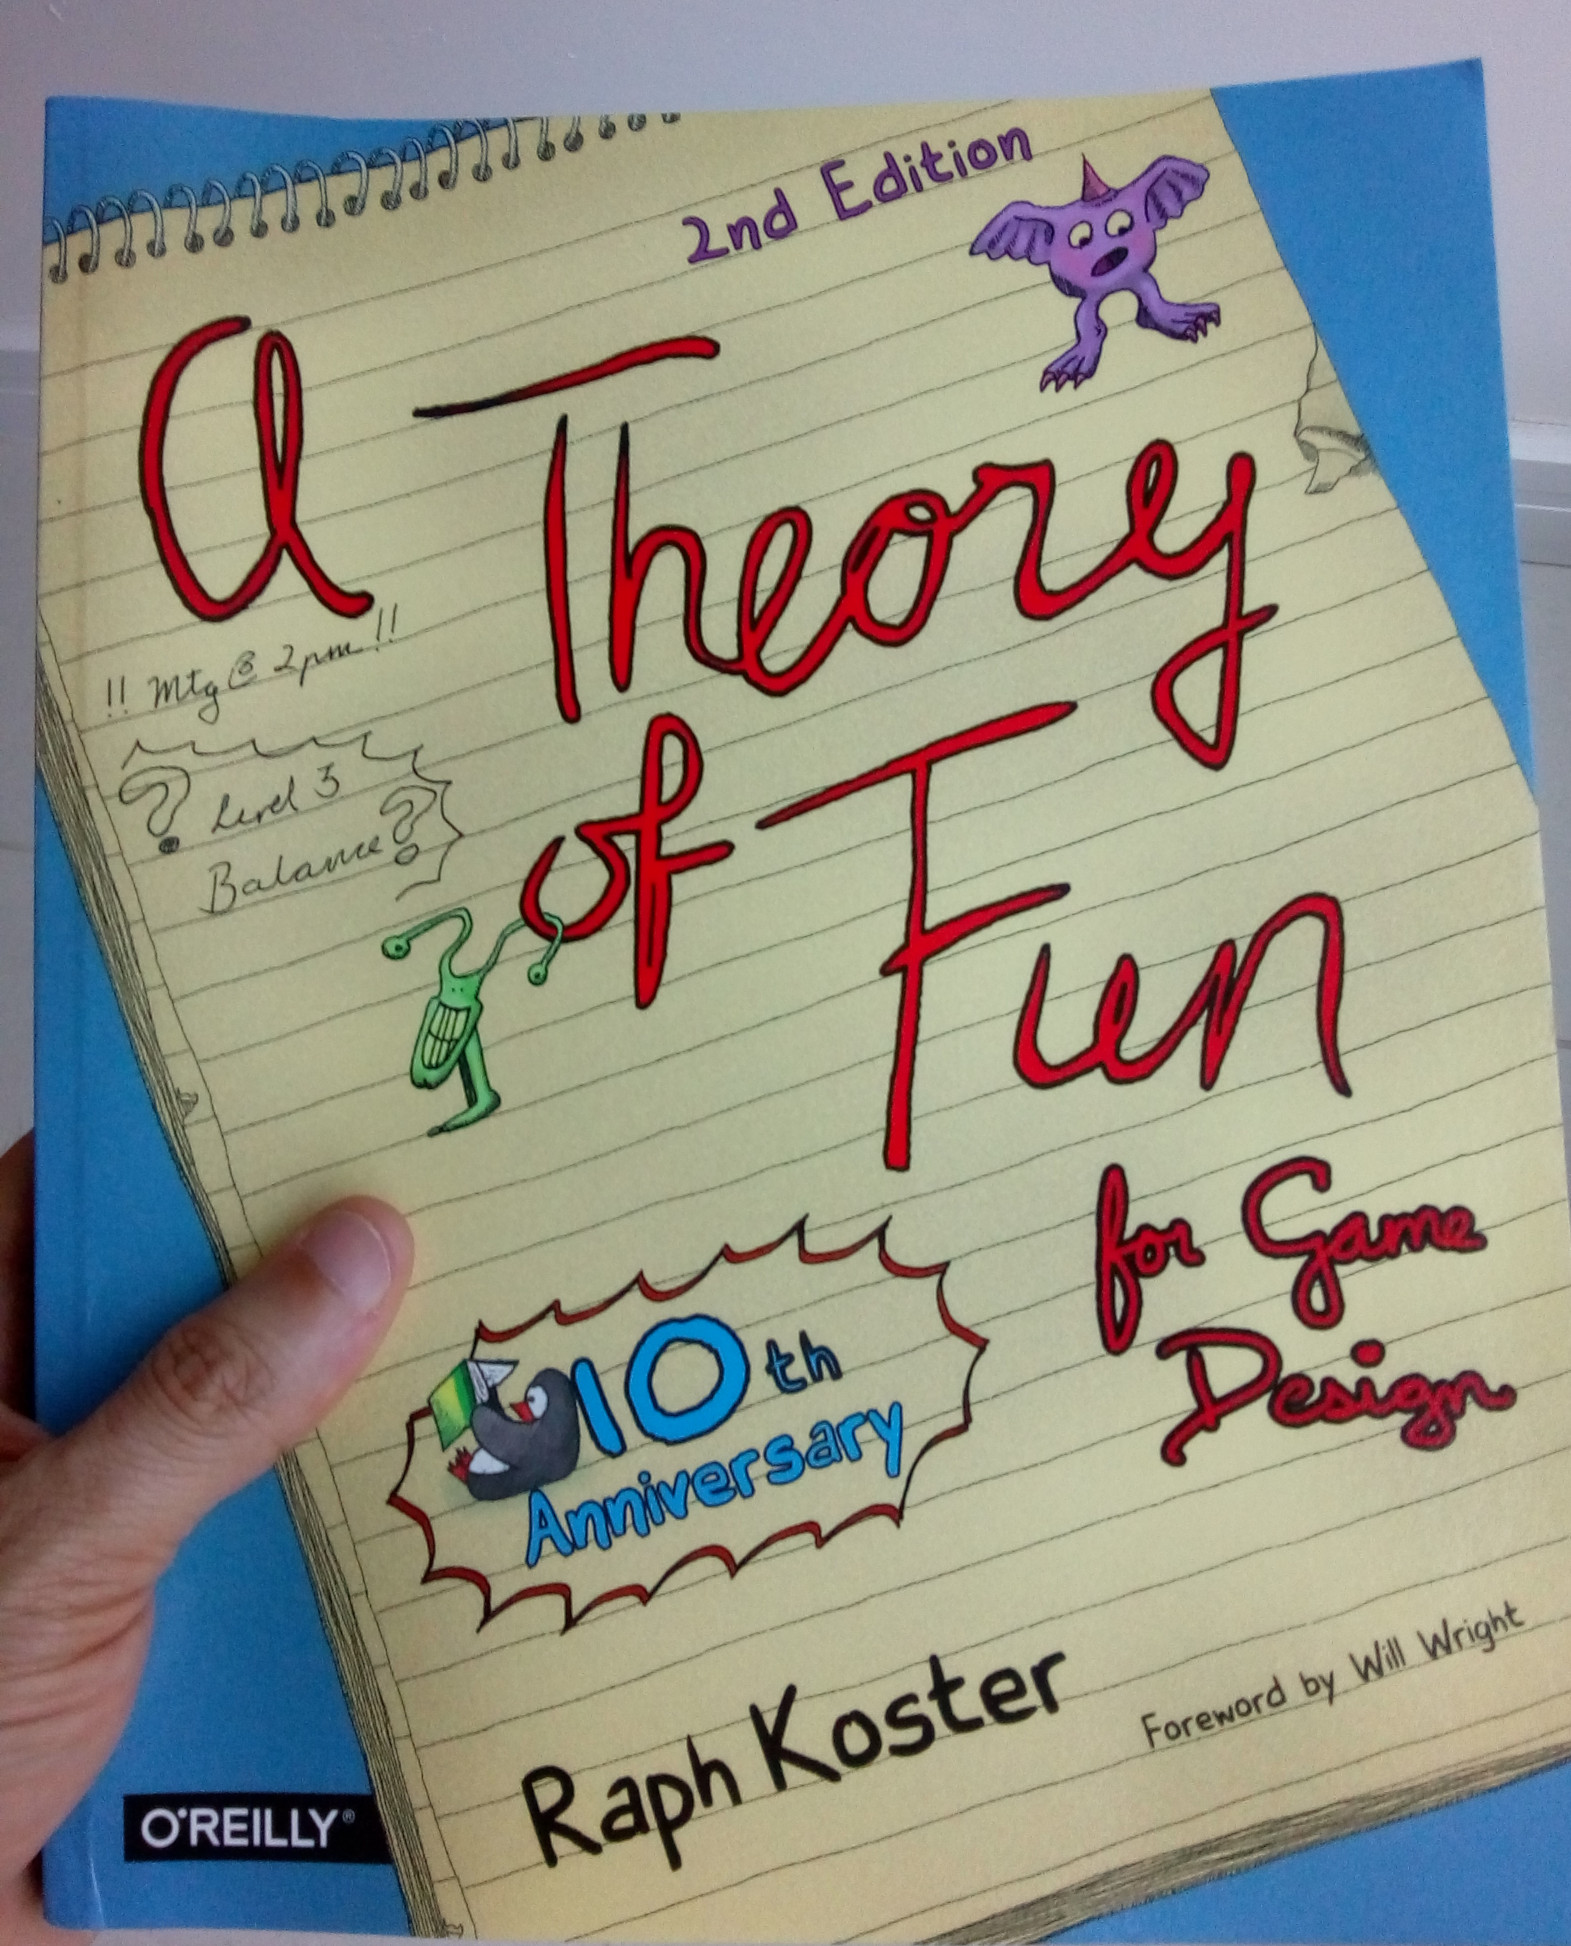 Book 'A Theory of Fun for Game Design', by Raph Koster.